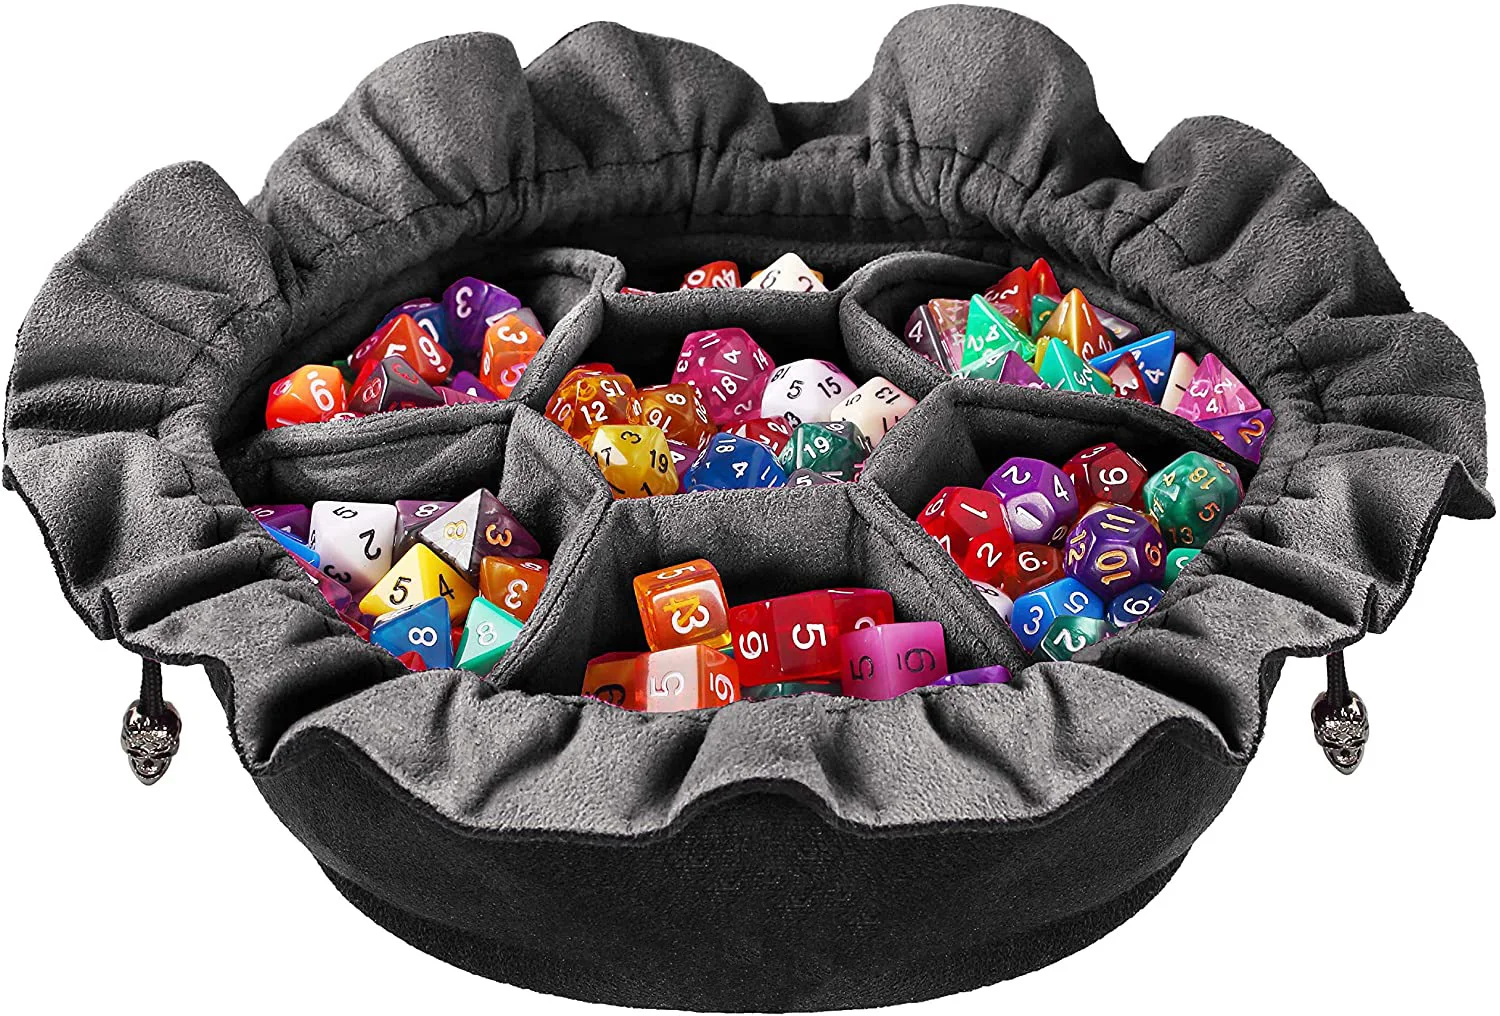 Perfect for Bulk Dice Dice Storage Bag with 6 Pockets Forged Dice Co Holds Over 1,000 Polyhedral Dice Pouch of The Endless Hoard Dice Bag